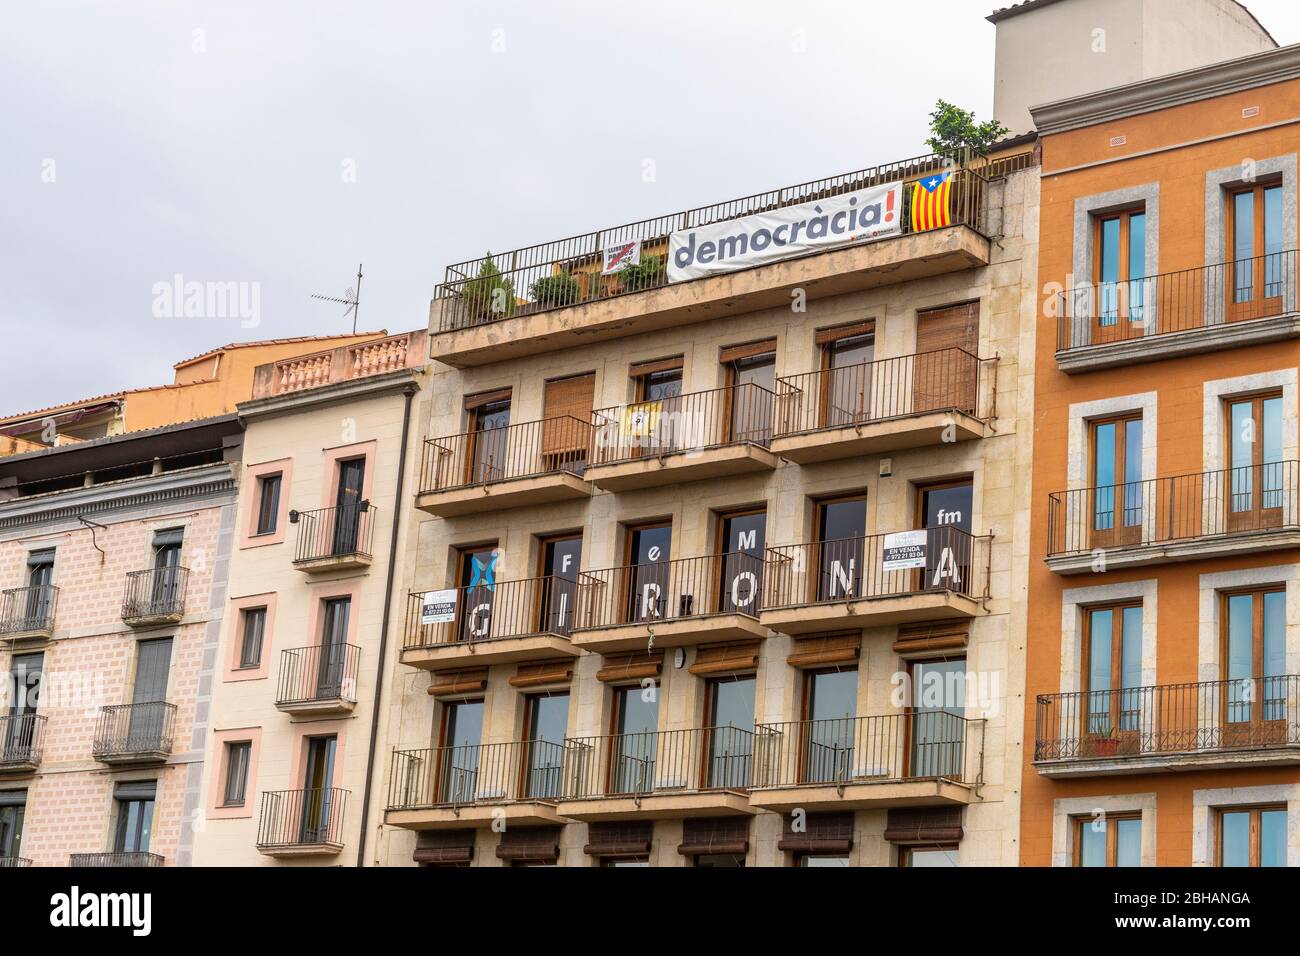 Europe, Spain, Catalonia, Girona, sign of the Catalan war of independence in the old town of Girona Stock Photo